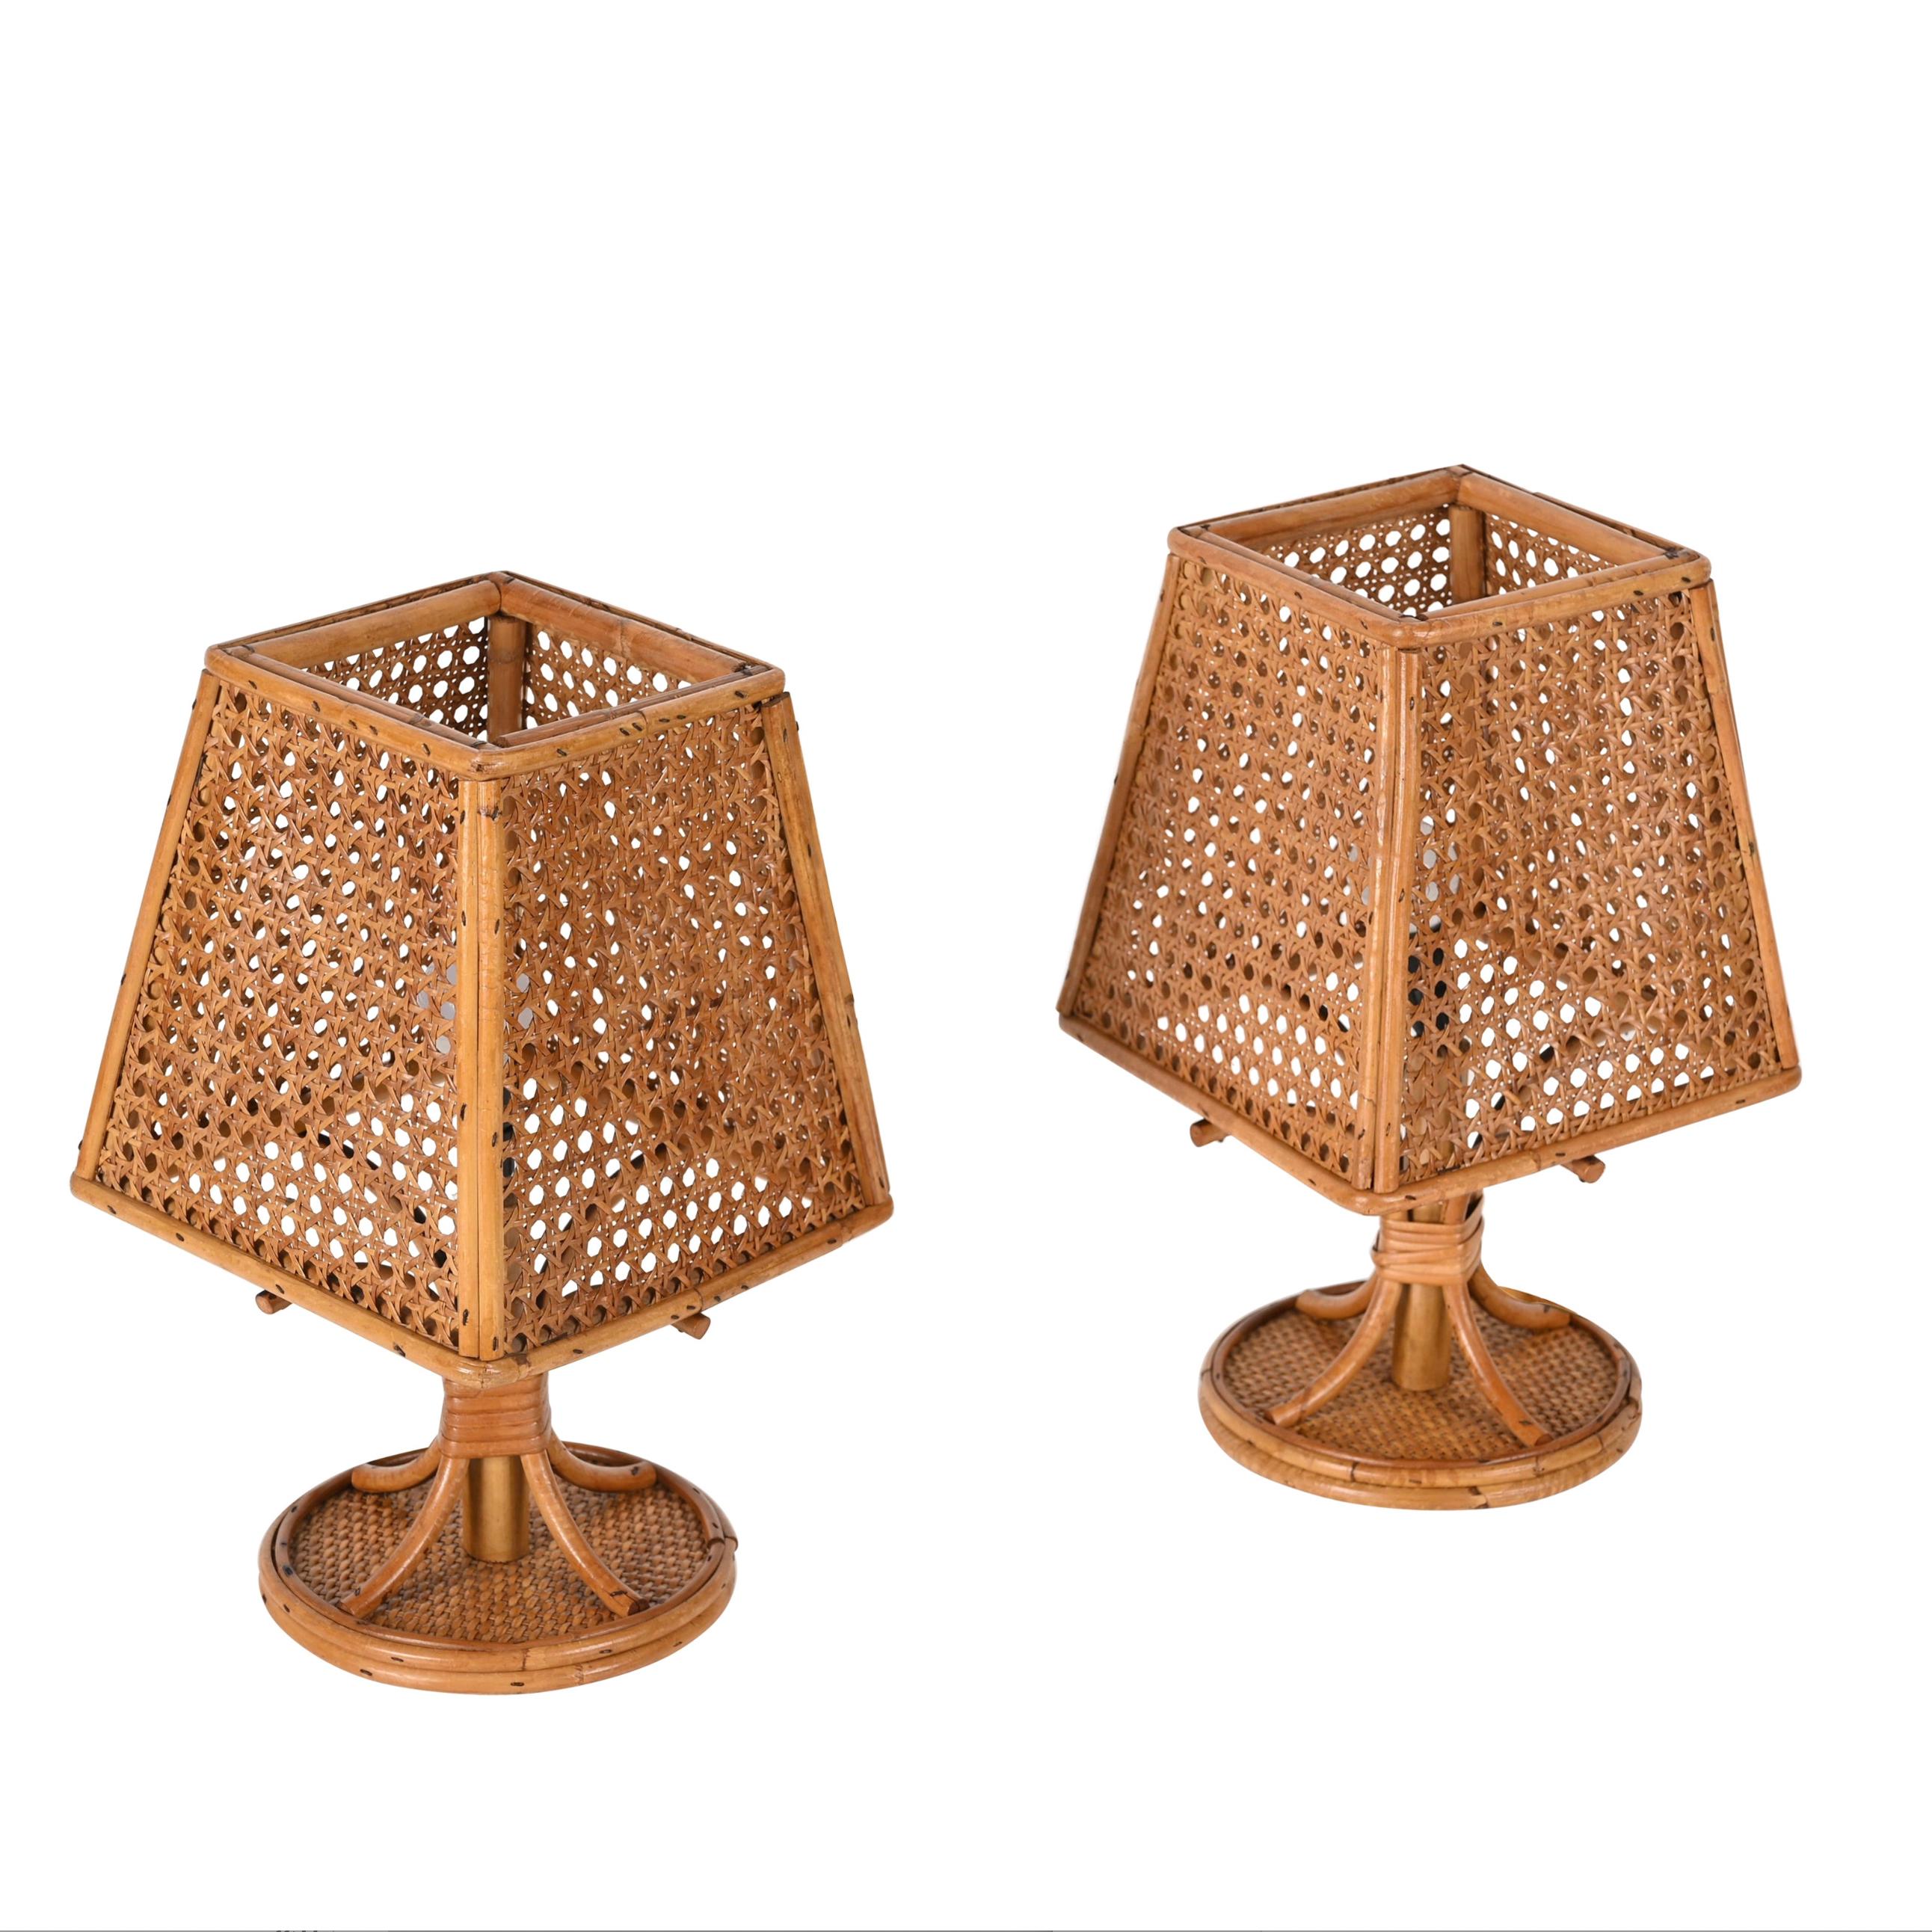 Italian Pair of French Riviera Table Lamps in Wicker and Rattan, Italy 1960s